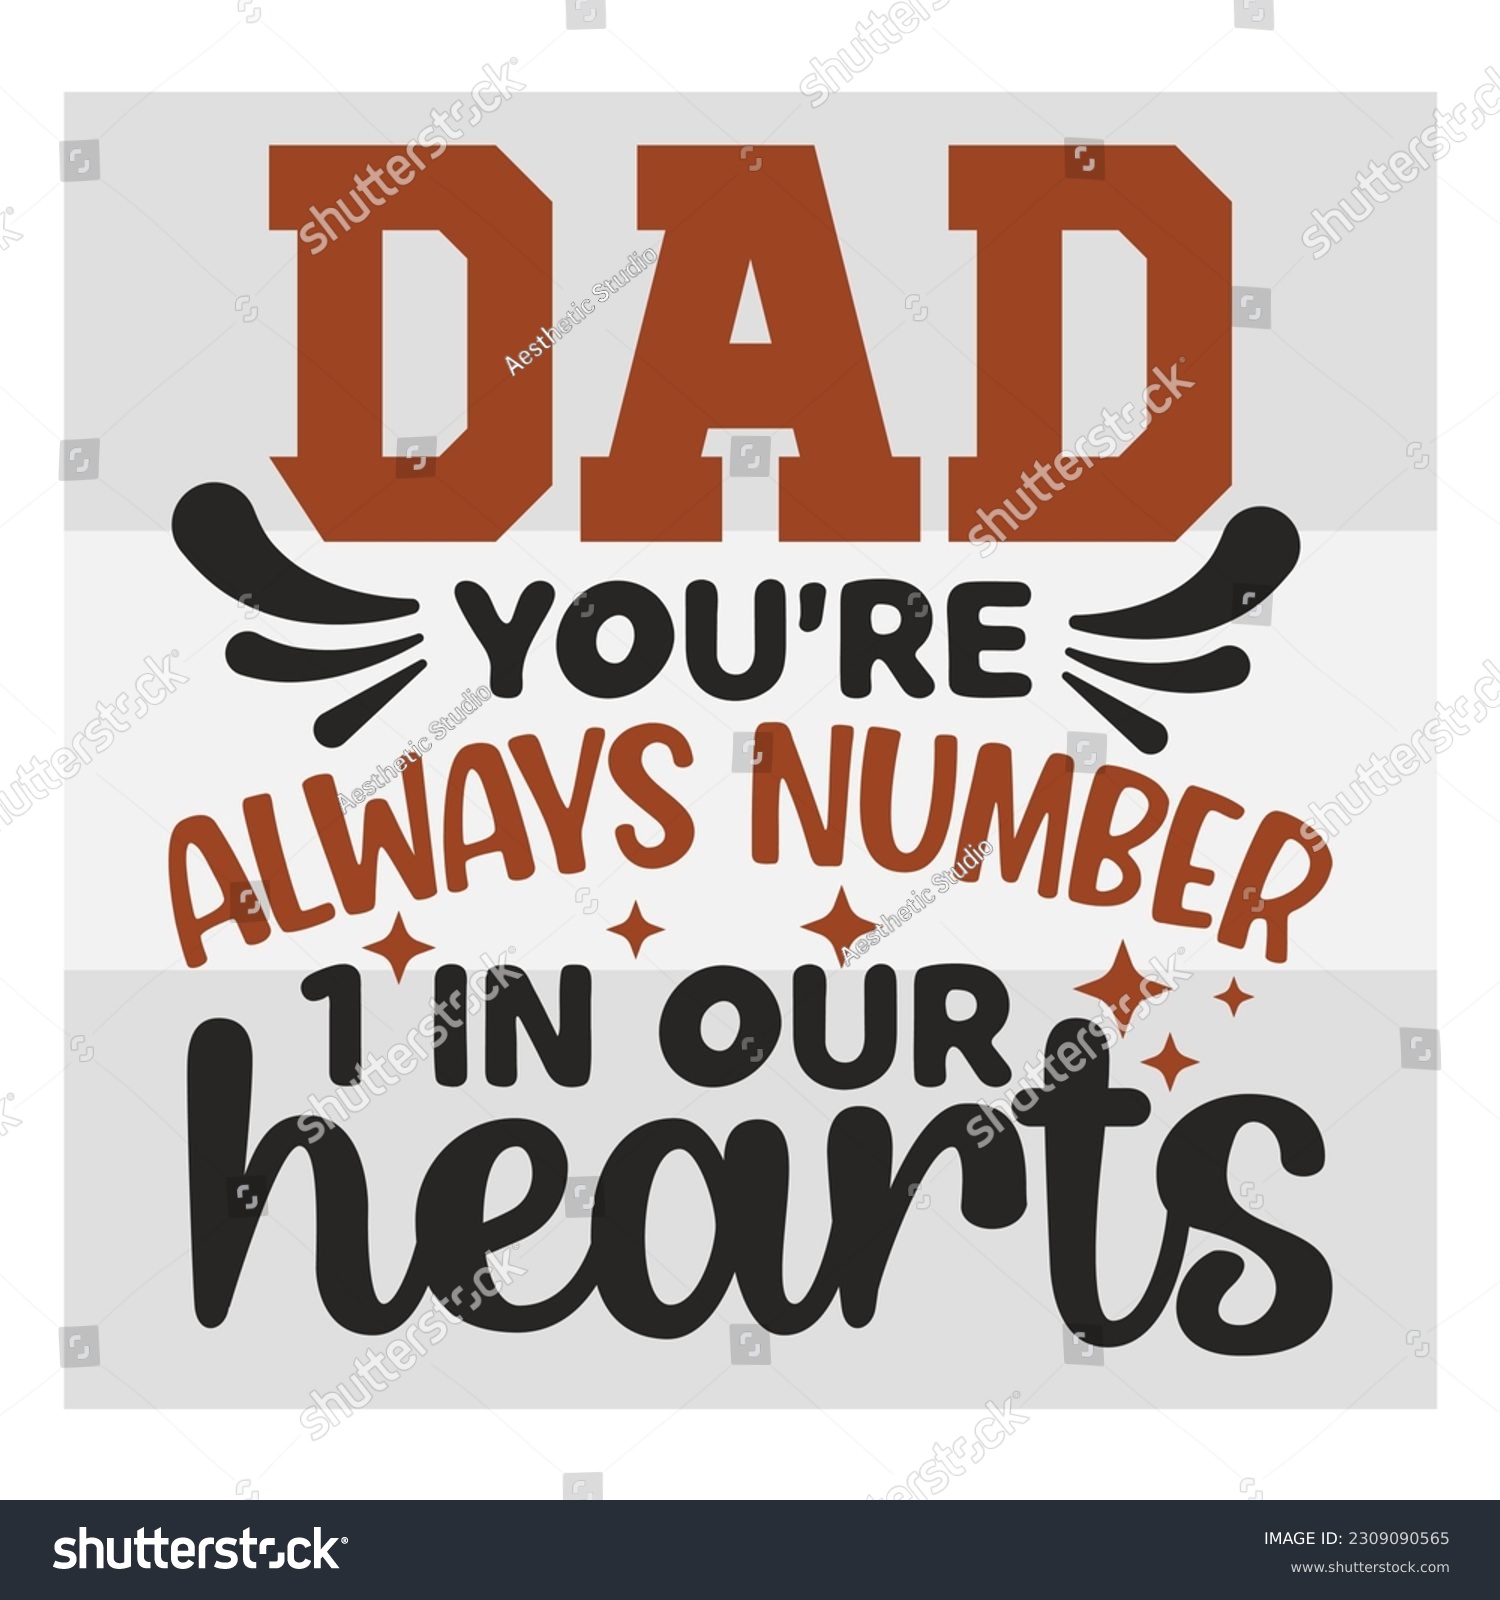 SVG of Dad, you're always number 1 in our hearts, Dad SVG, First Father's Day Gift, Father Day Svg, Father Day Shirts, Father's Day Quotes, Typography Quotes, Eps, Cut file svg